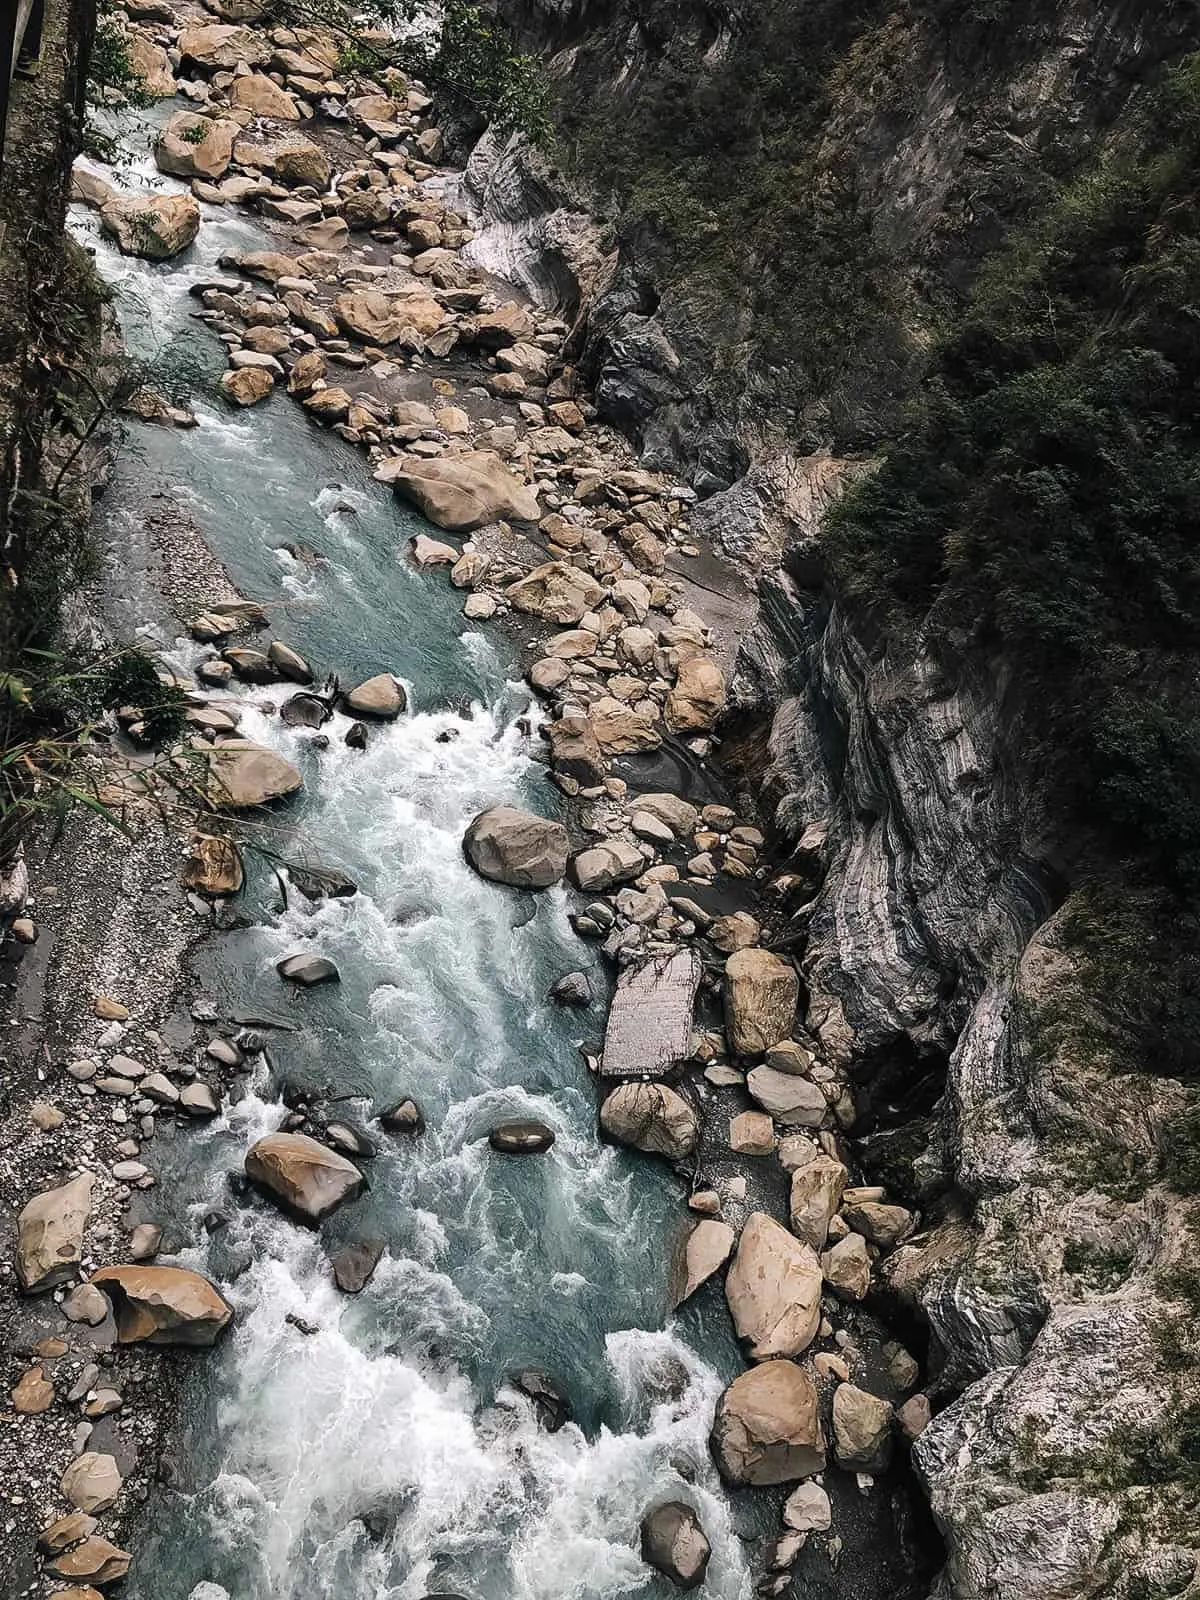 View of the river at Taroko Gorge in Hualien, Taiwan